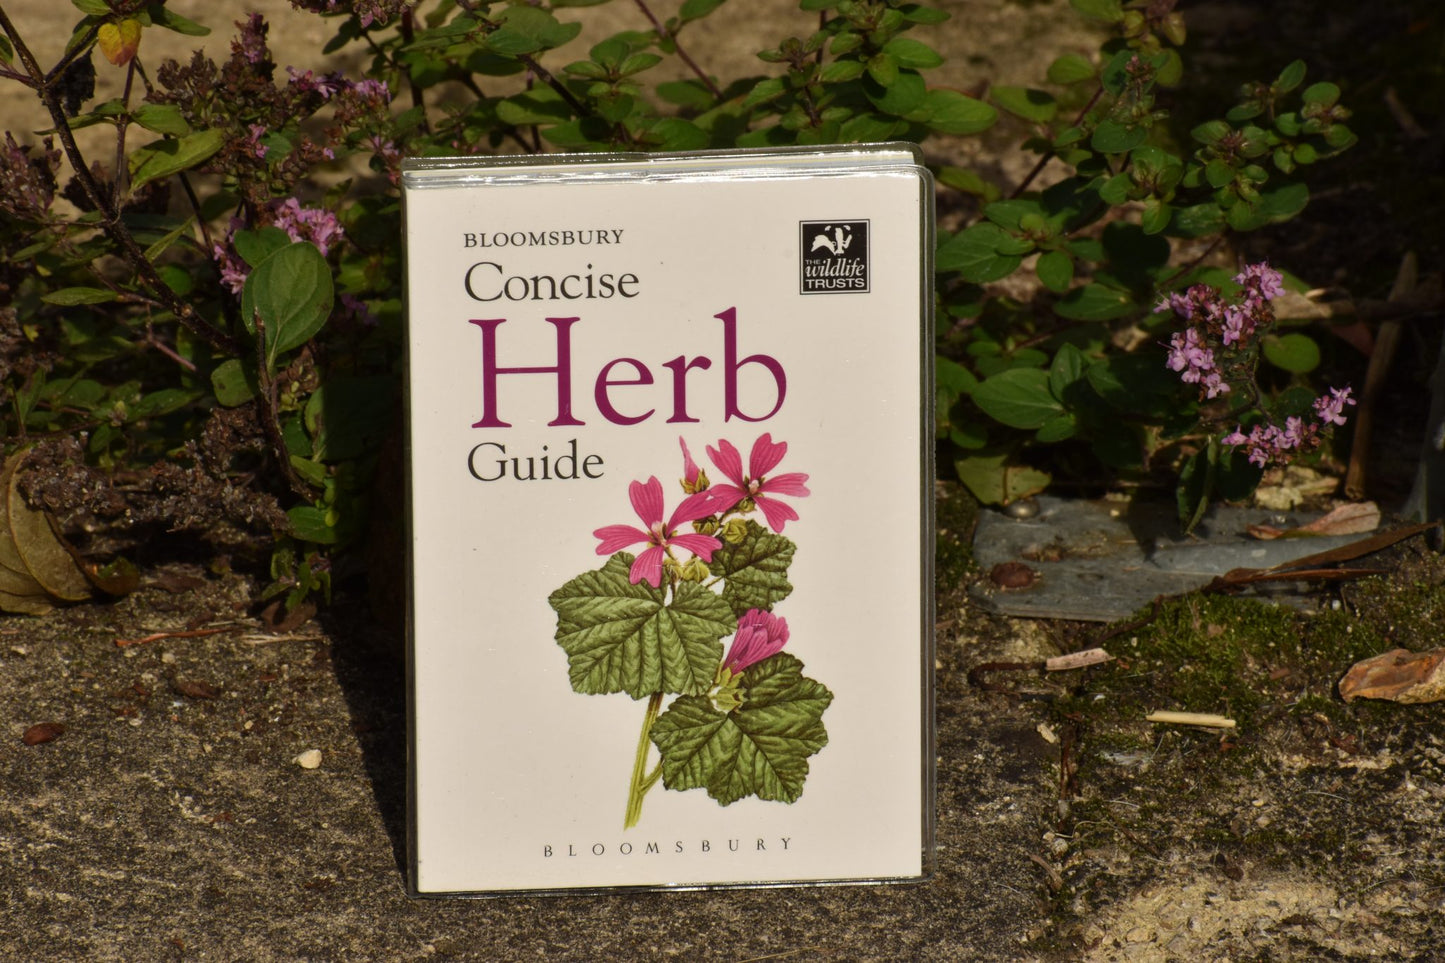 Bloomsbury Concise Herb Guide